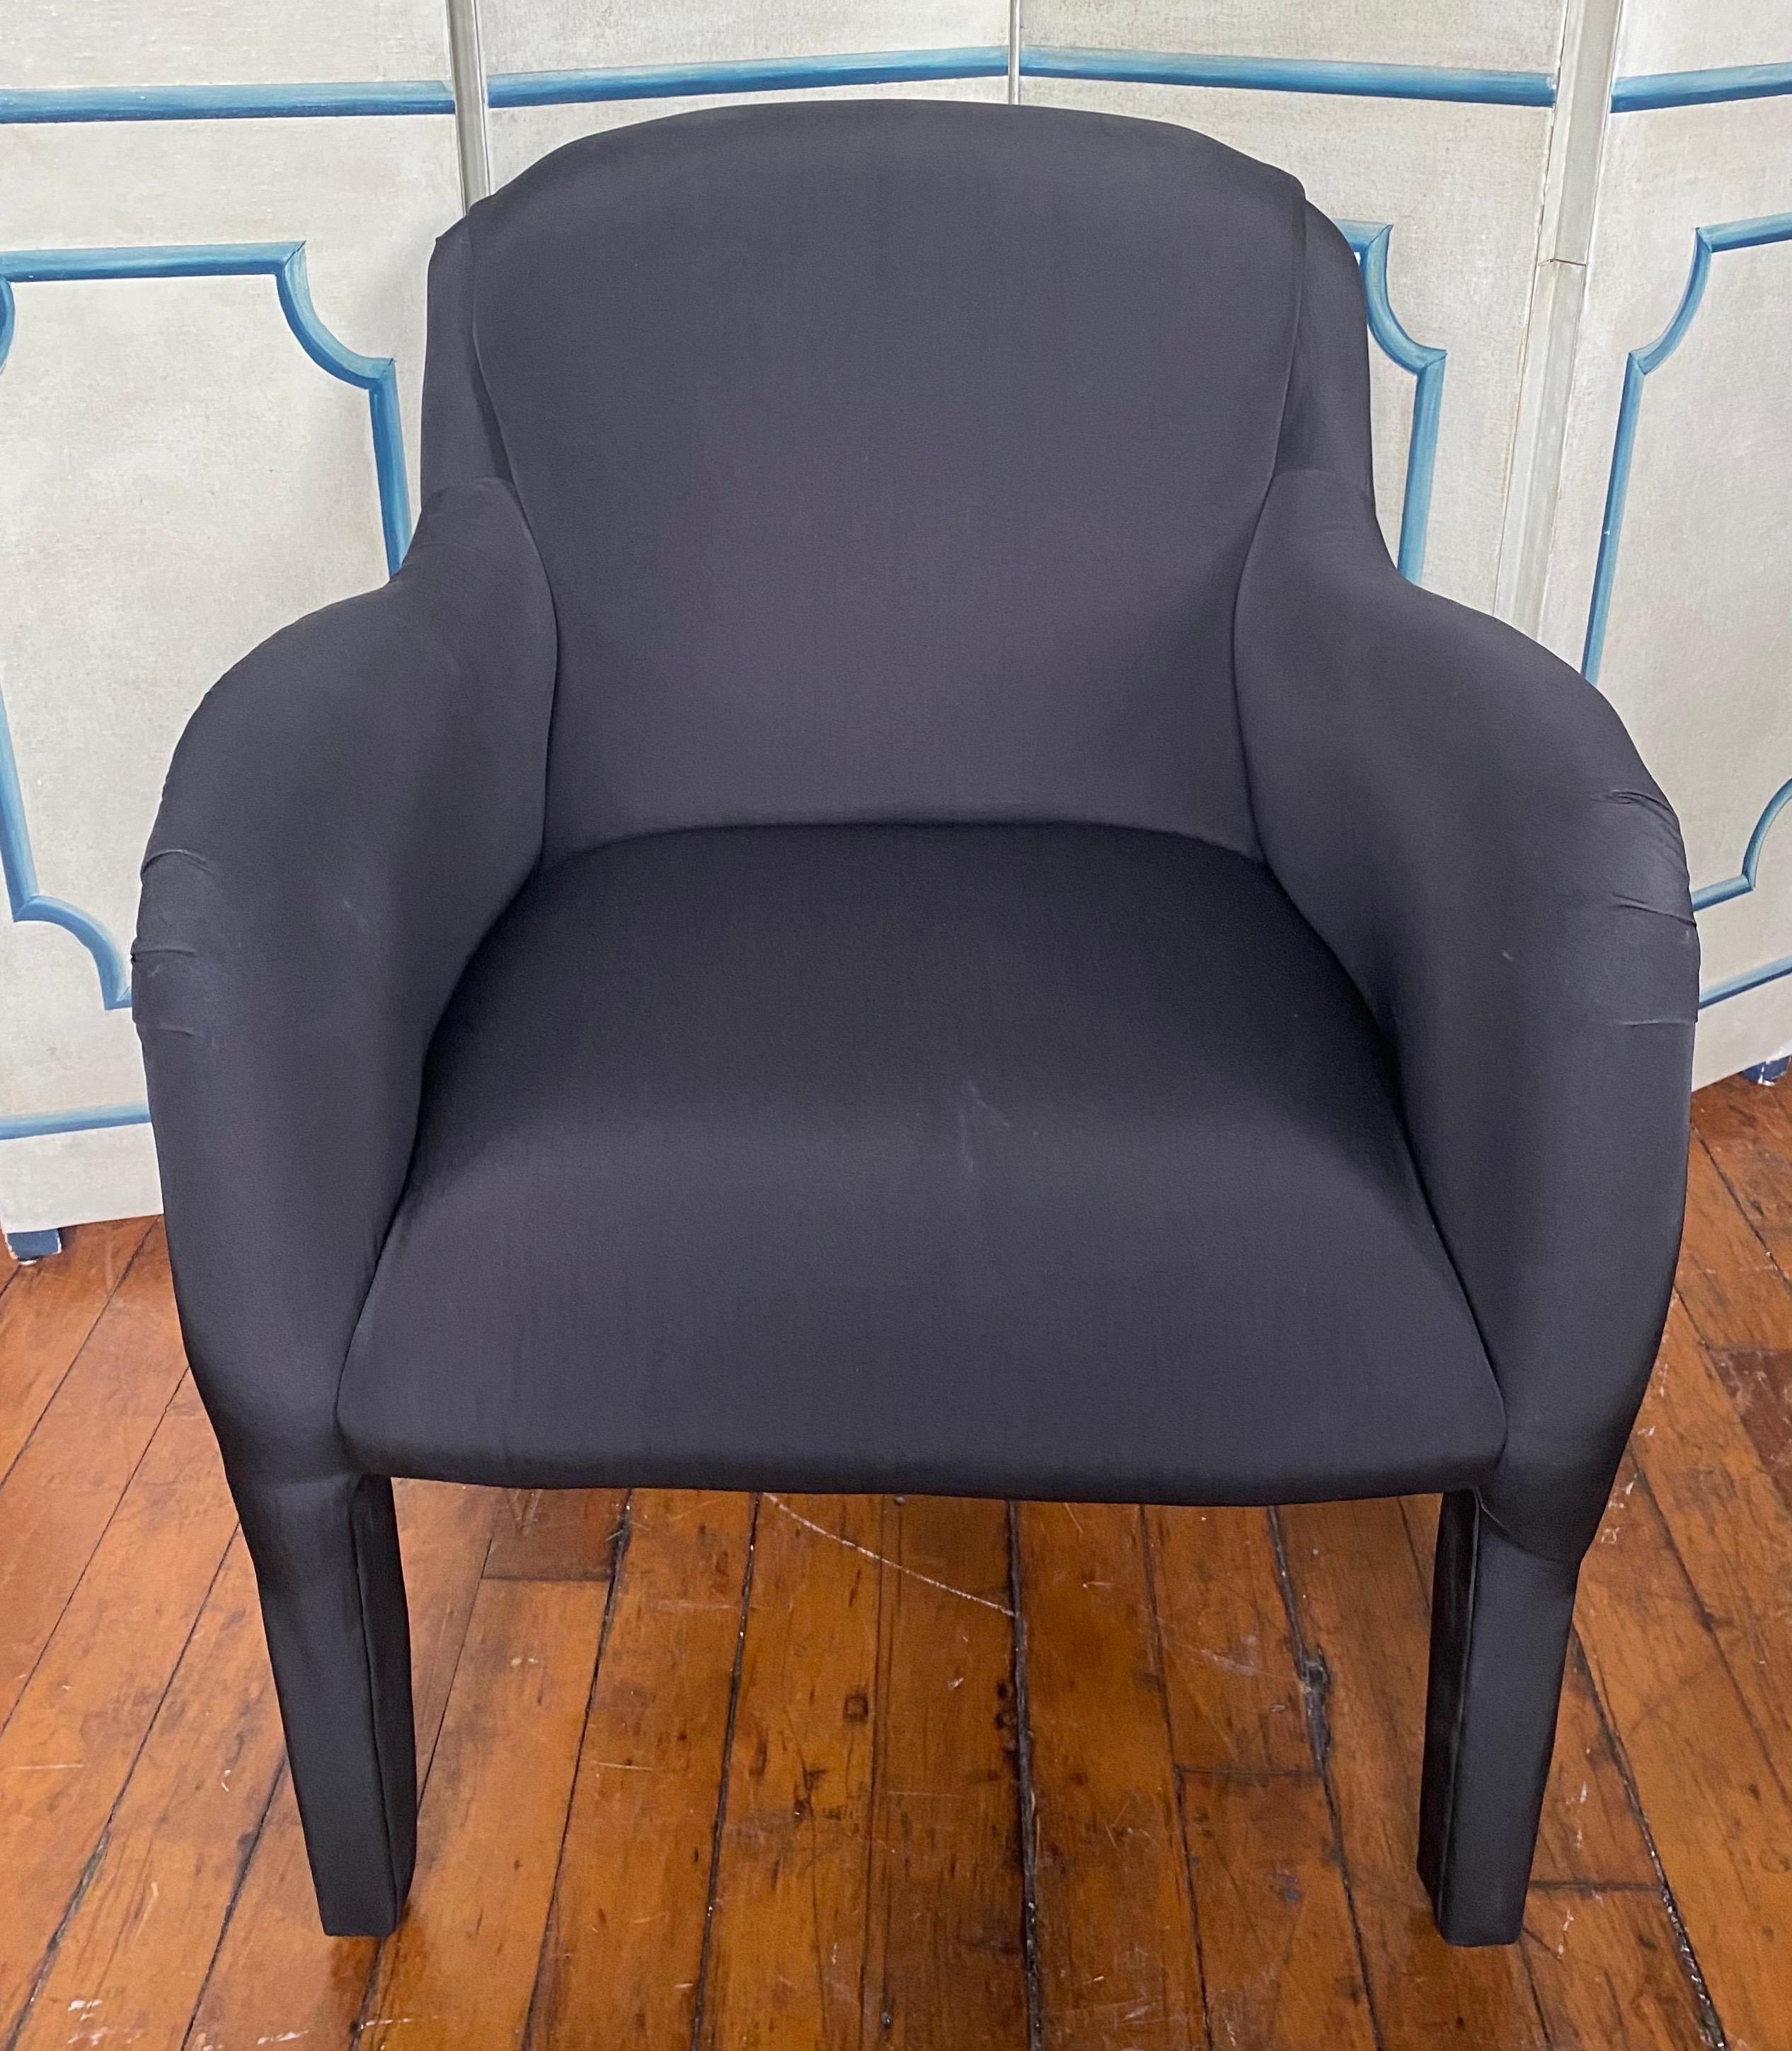 1980’s Post Modern Sculptural Black Upholstered Lounge Rounded Arm Chair In Good Condition For Sale In Lambertville, NJ